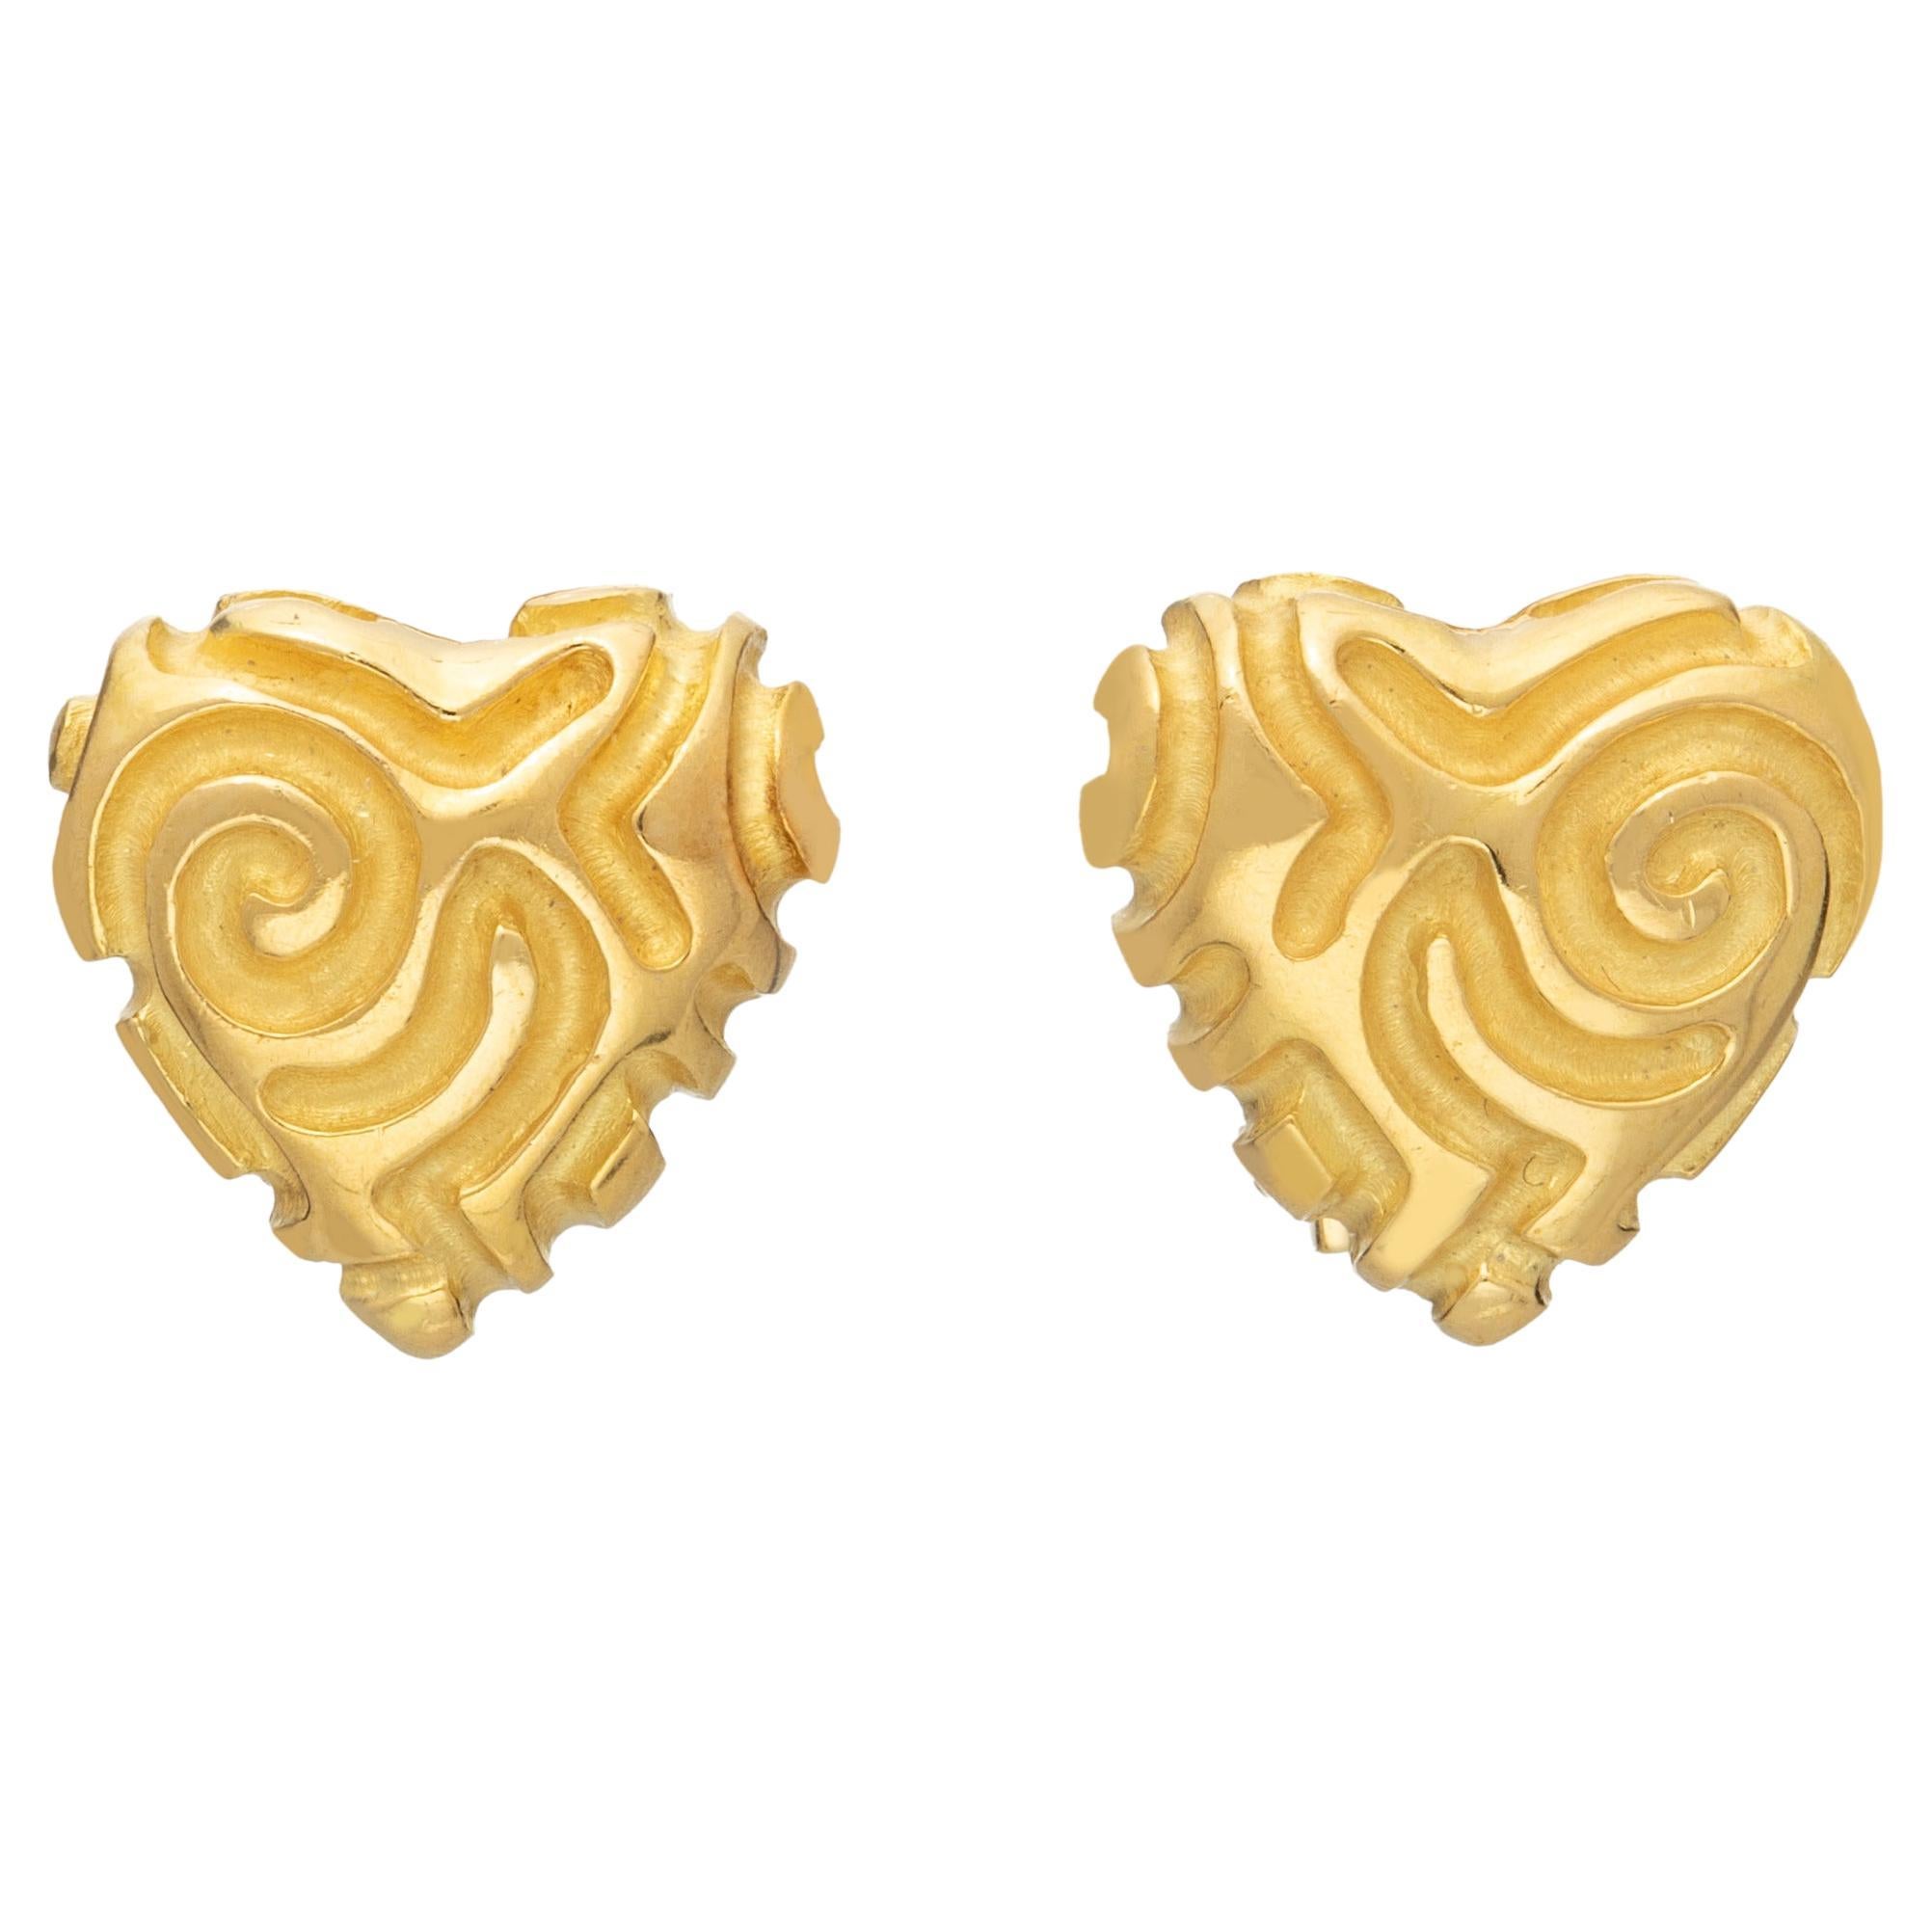 Carved Heart Earrings in 18k Gold, by Gloria Bass Design